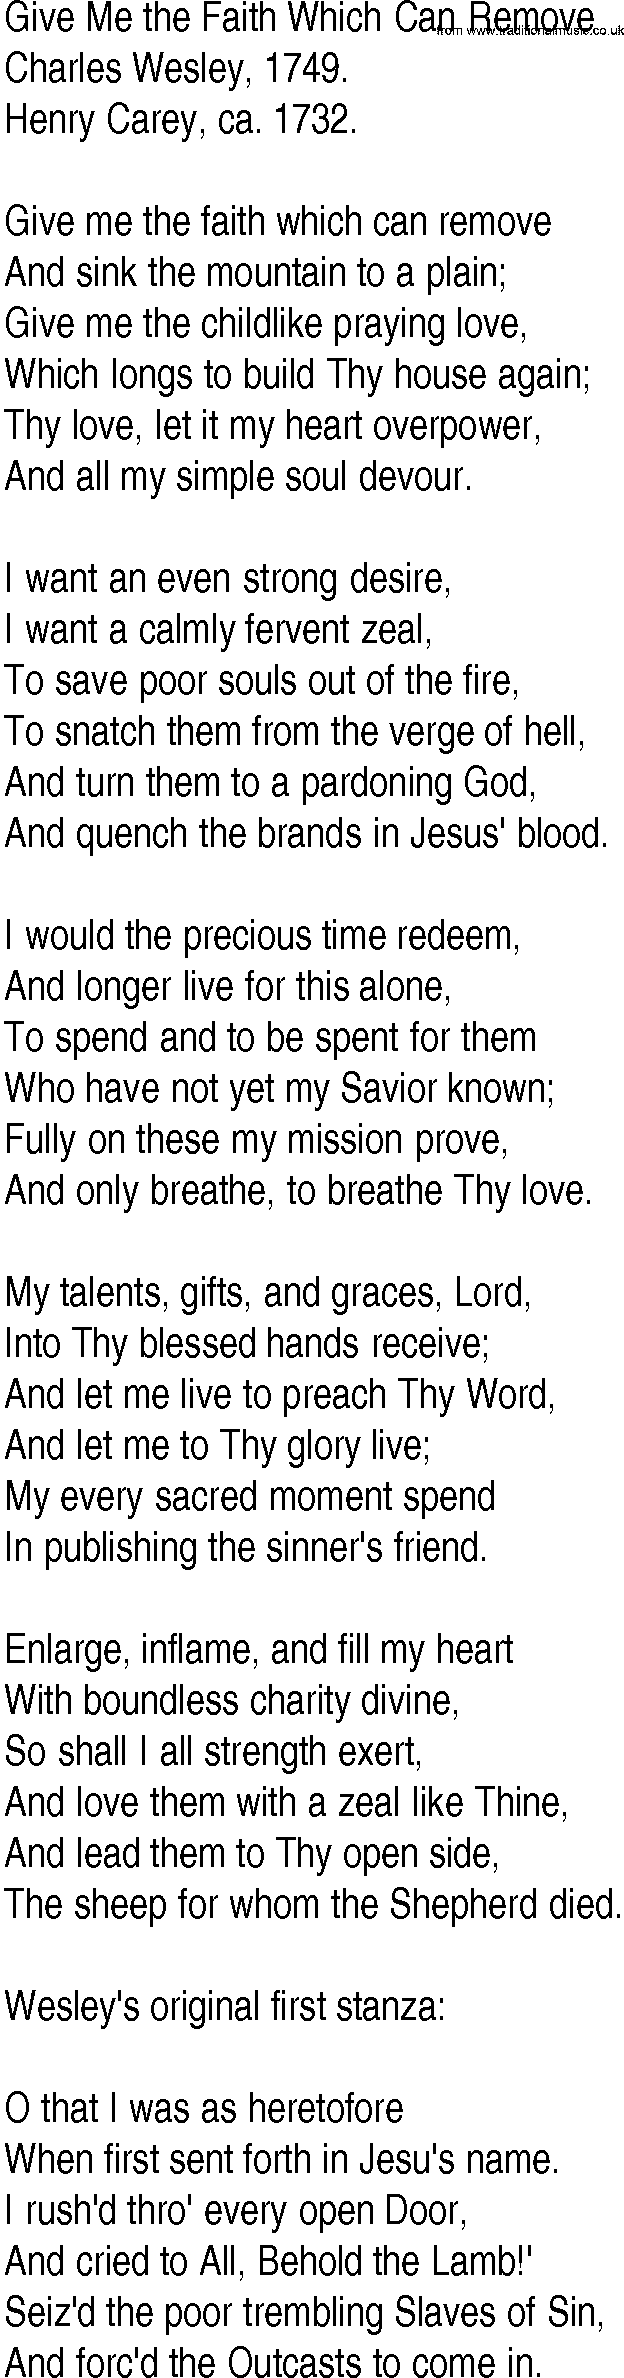 Hymn and Gospel Song: Give Me the Faith Which Can Remove by Charles Wesley lyrics